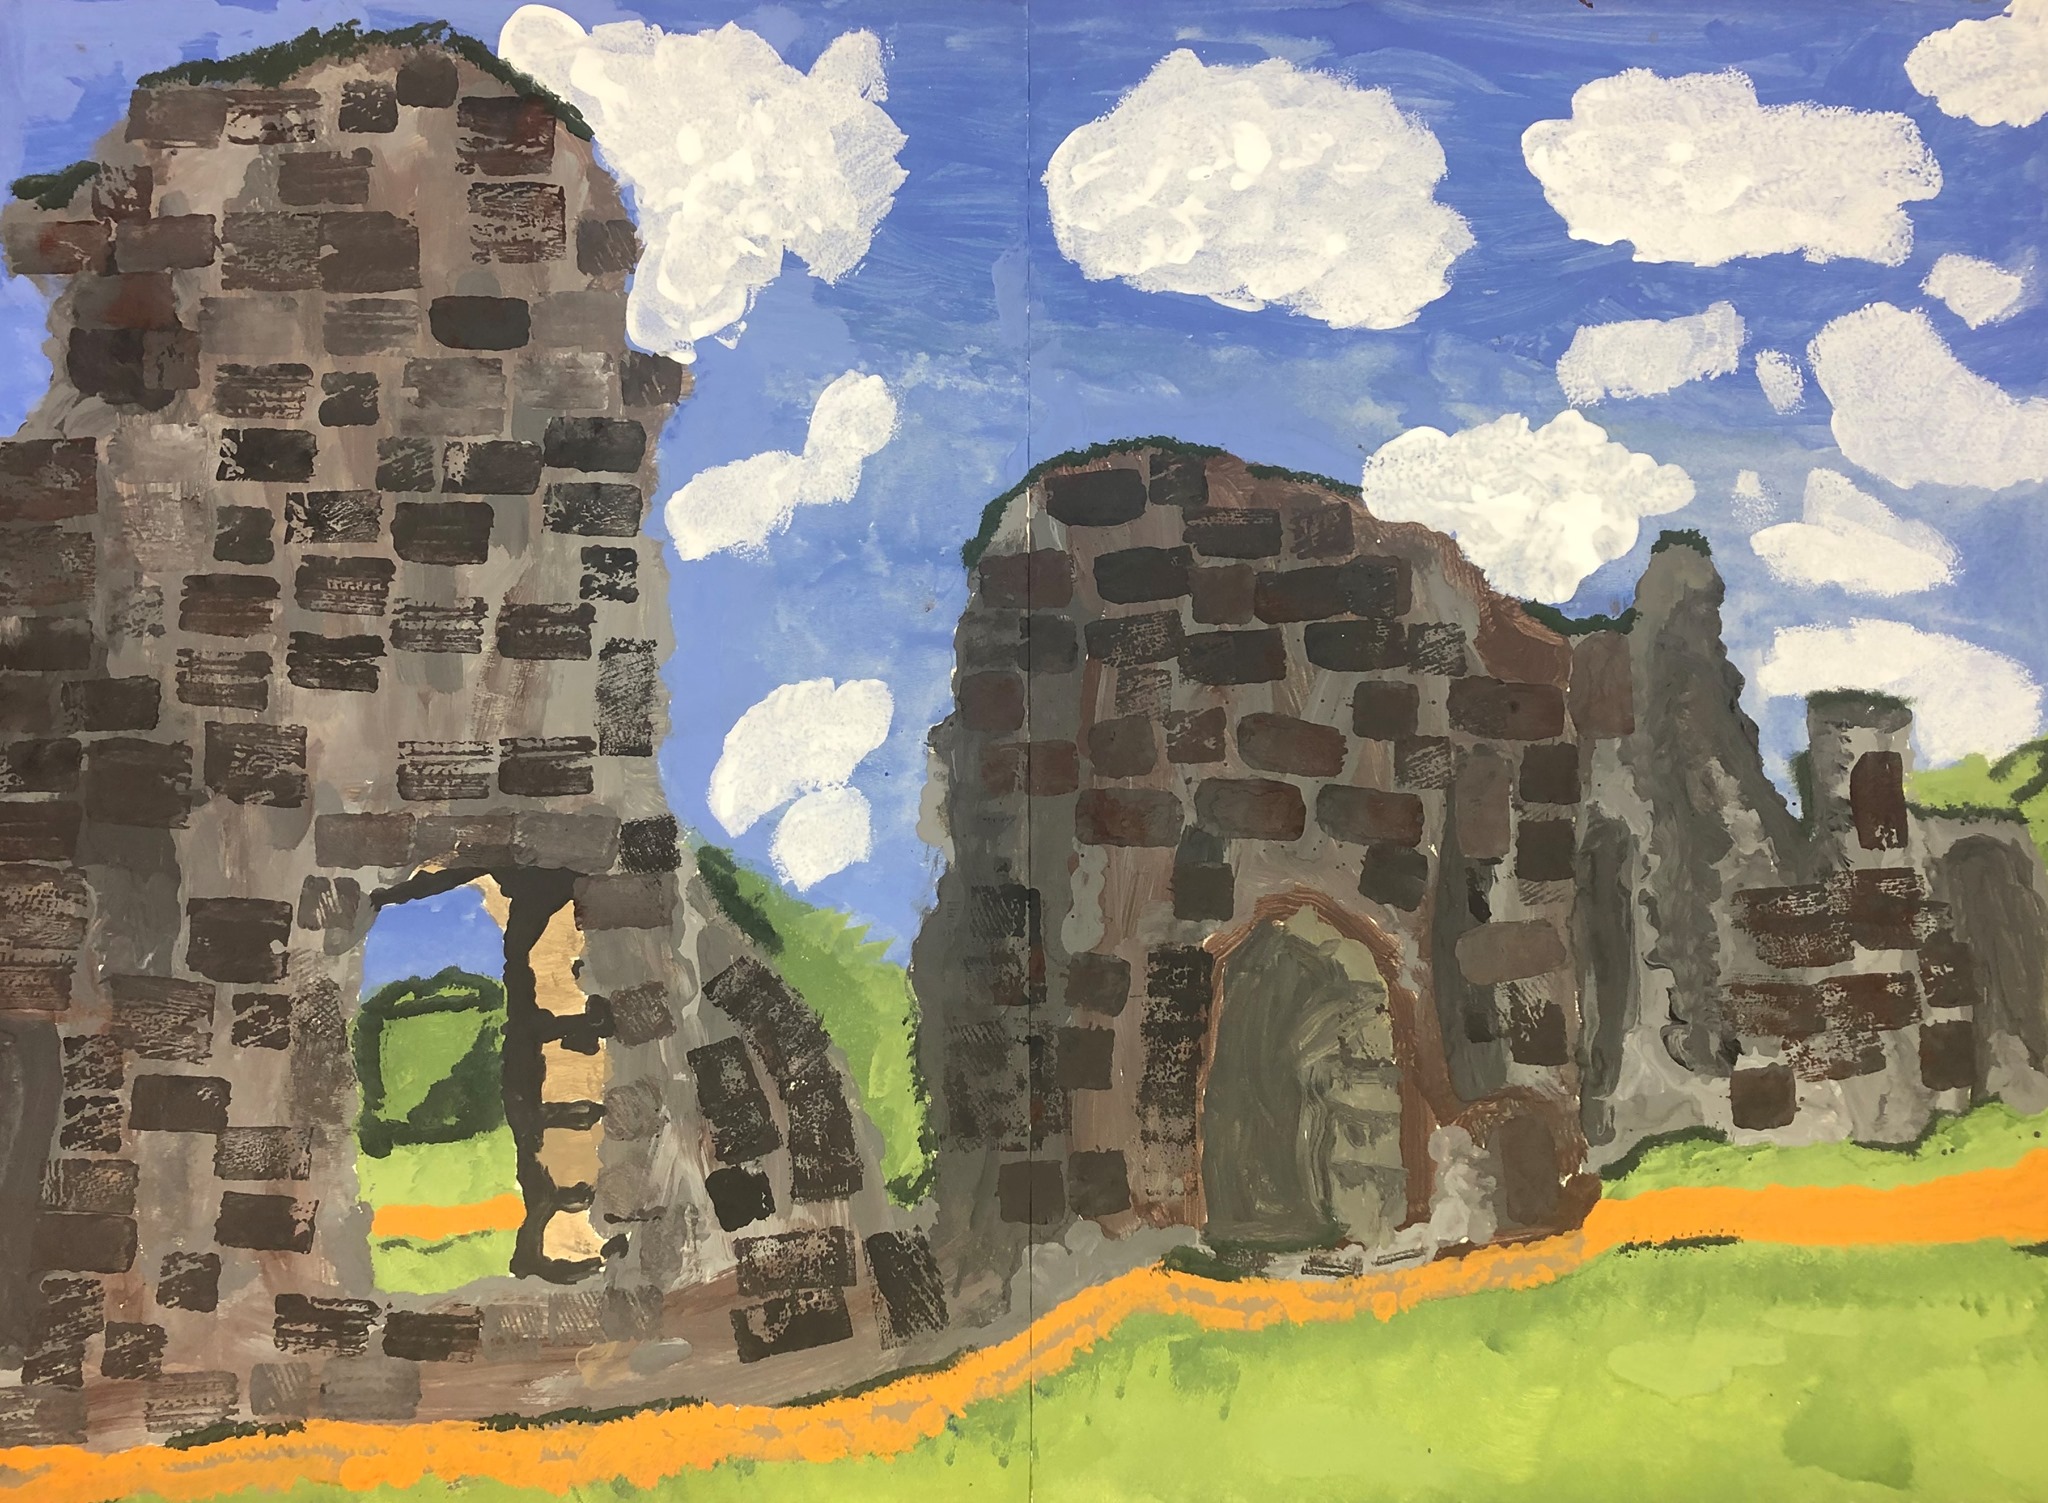 The Priory painted by Years 5 & 6 from Thringstone Primary School 2020